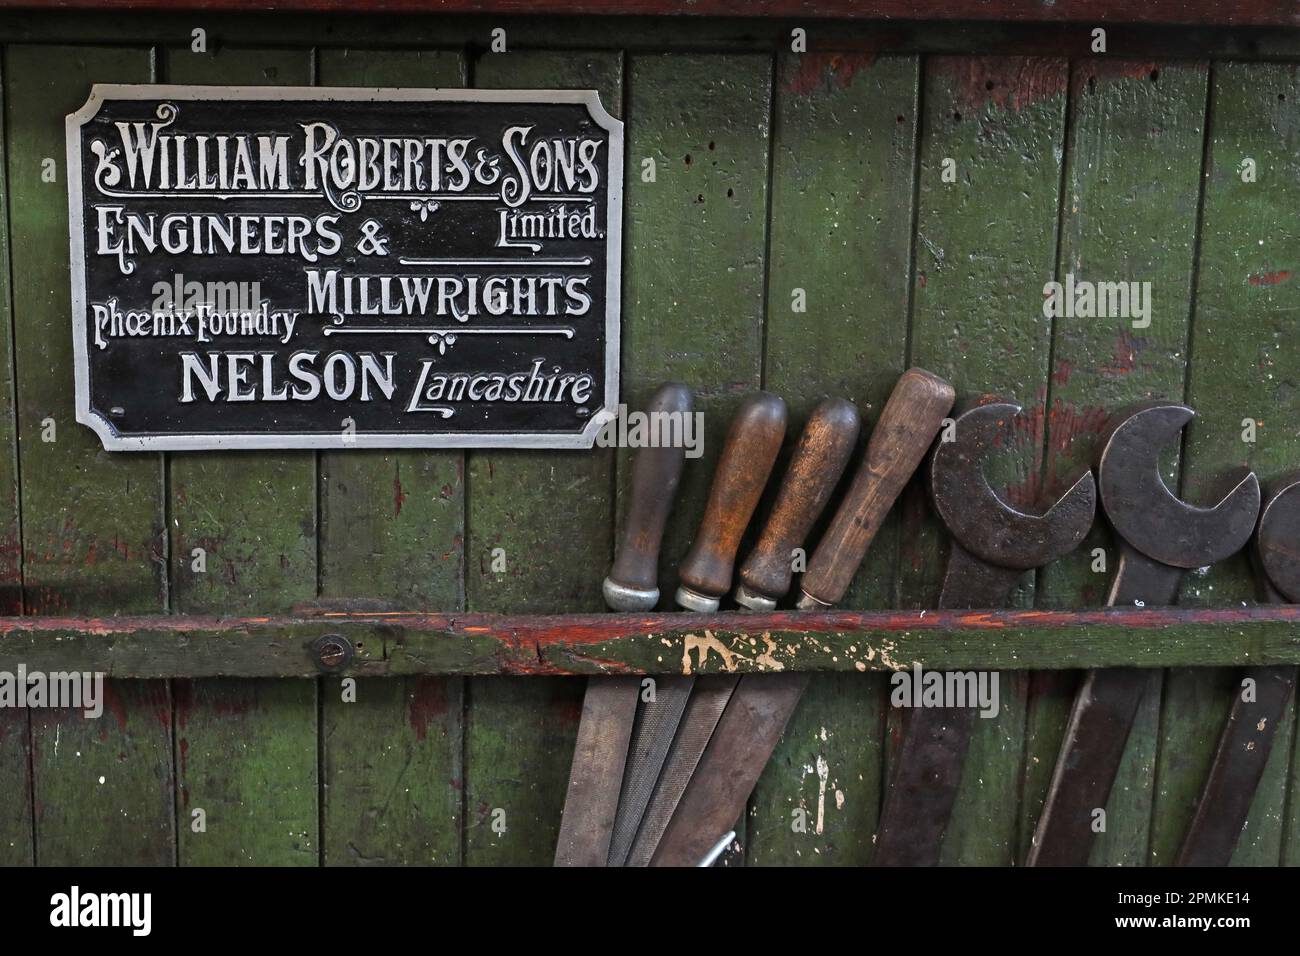 William Roberts & sons, Millwrights, Engineers, Phoenix Foundry, Nelson Lancashire plate, North West England, UK, BB9 with files, spanners Stock Photo